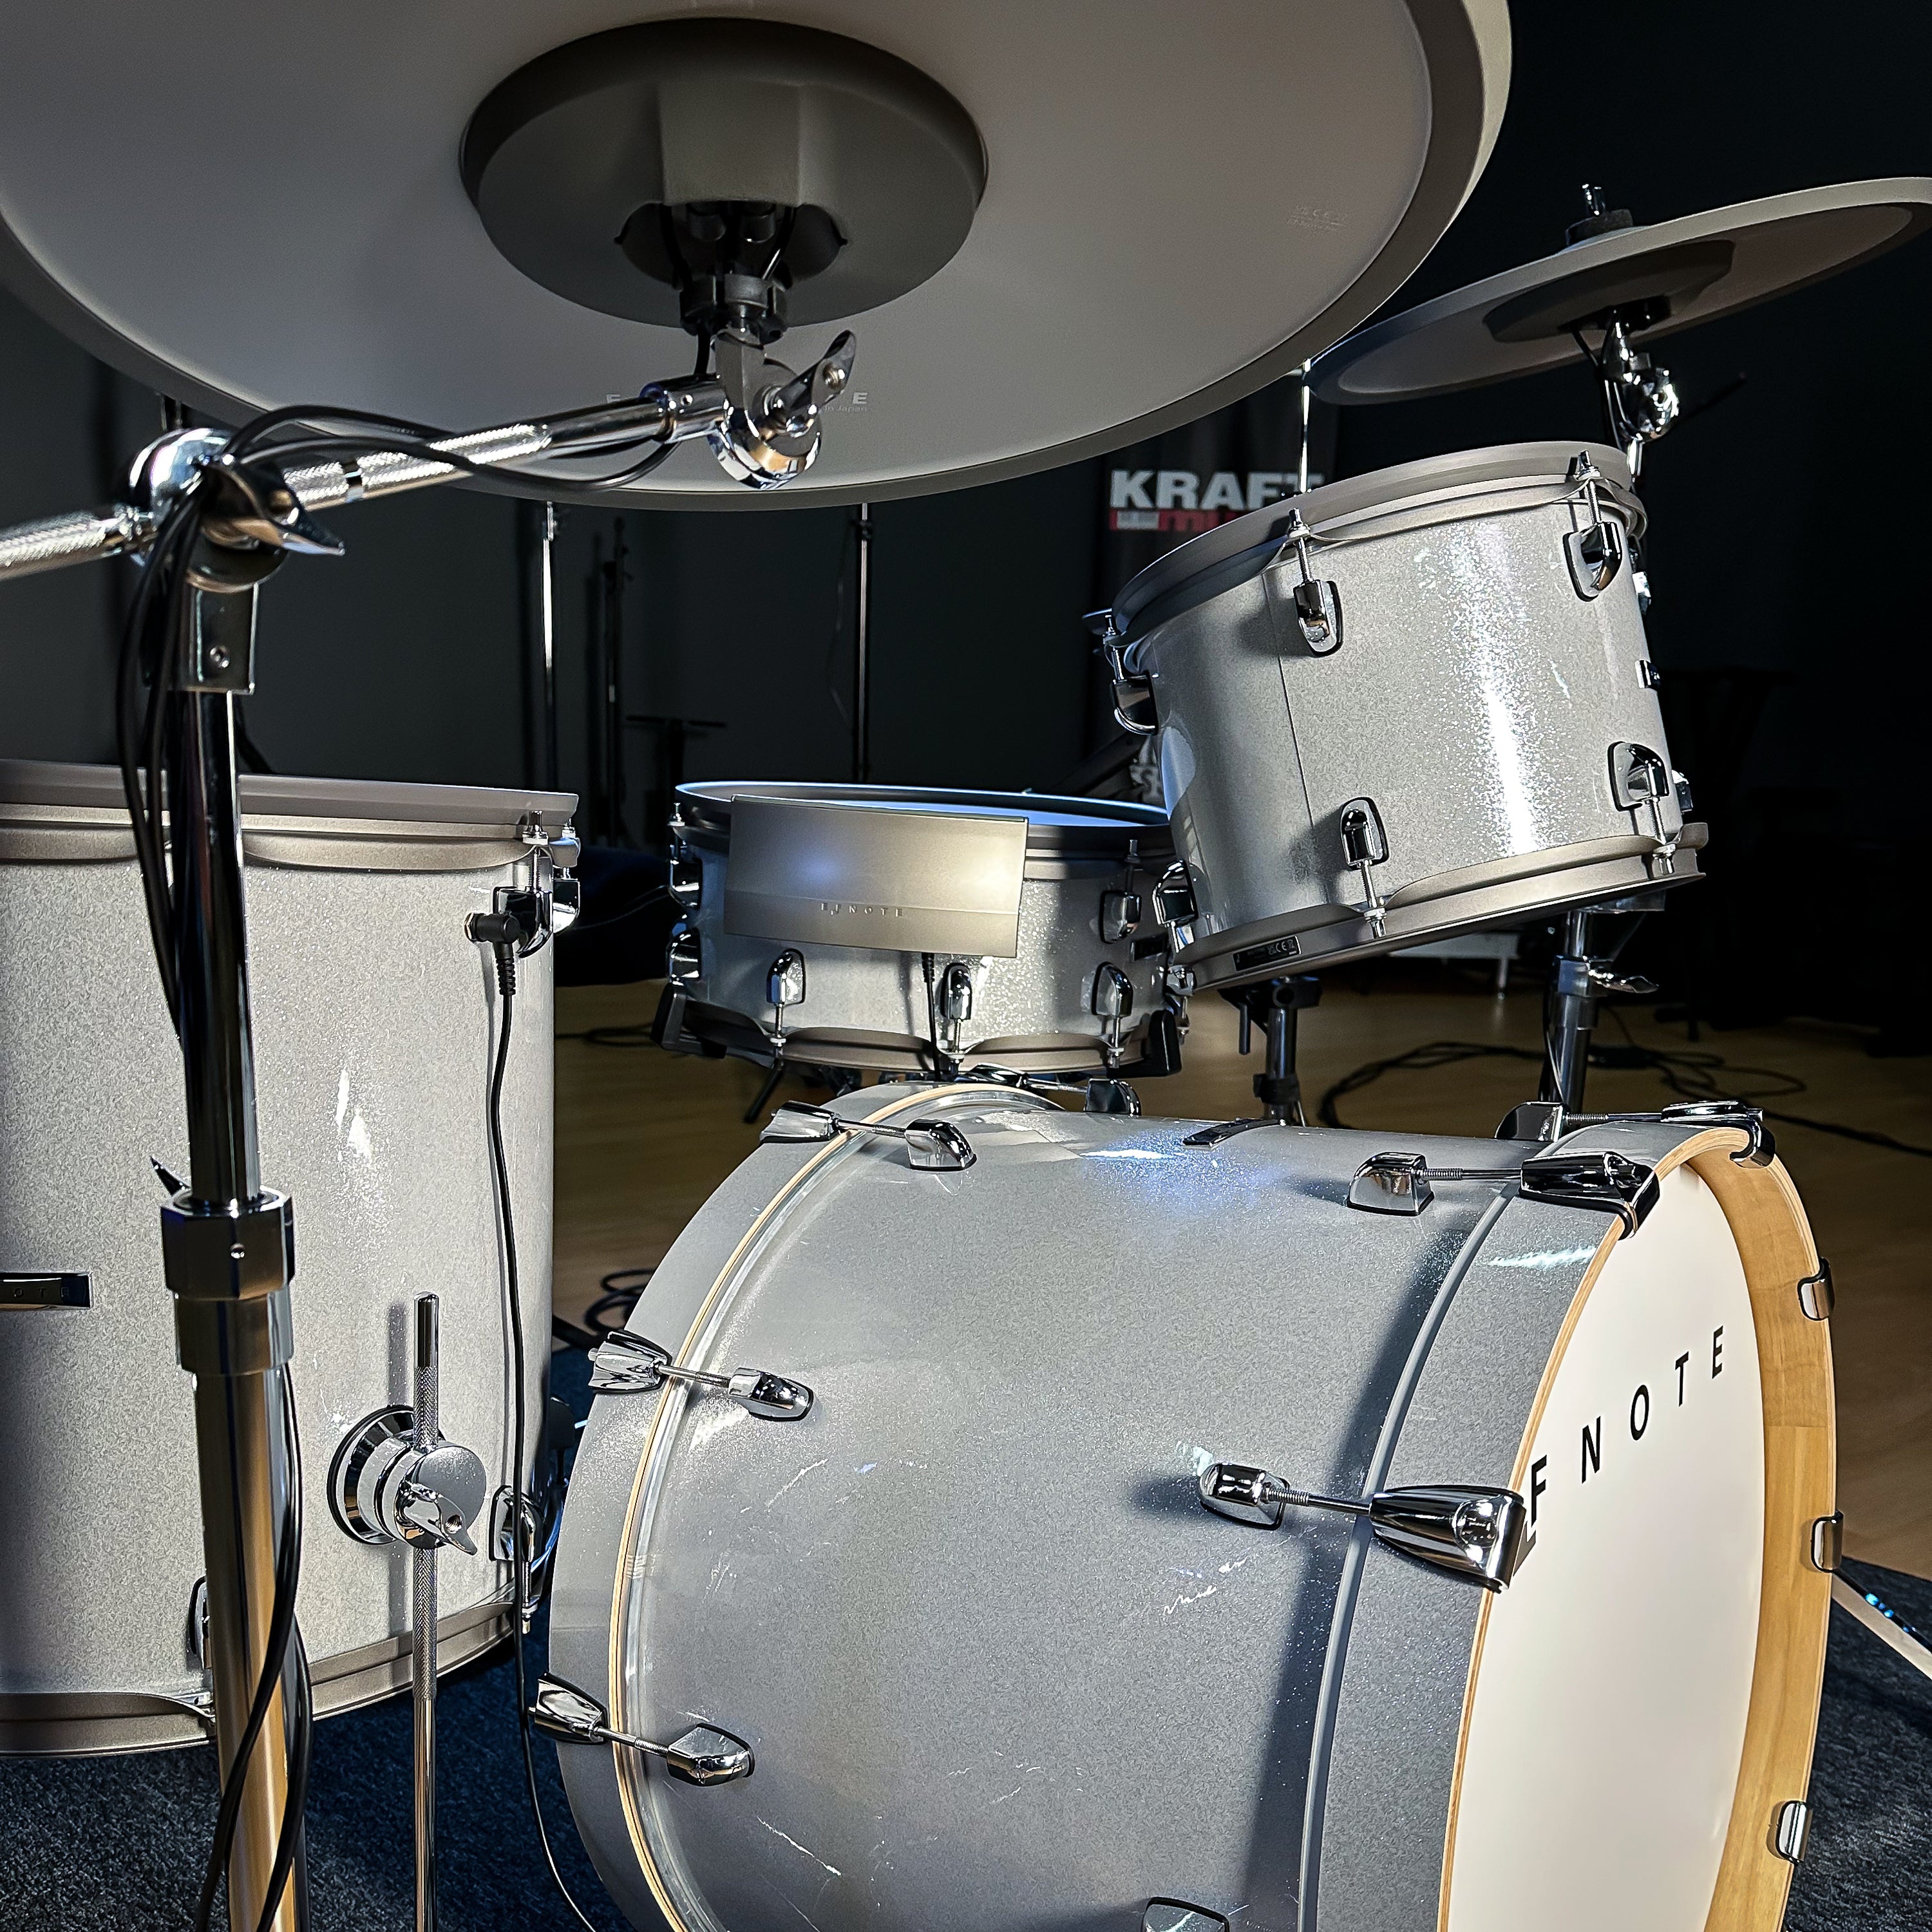 EFNOTE PRO 700 Standard Electronic Drum Kit - close-up view from the drummer's right side